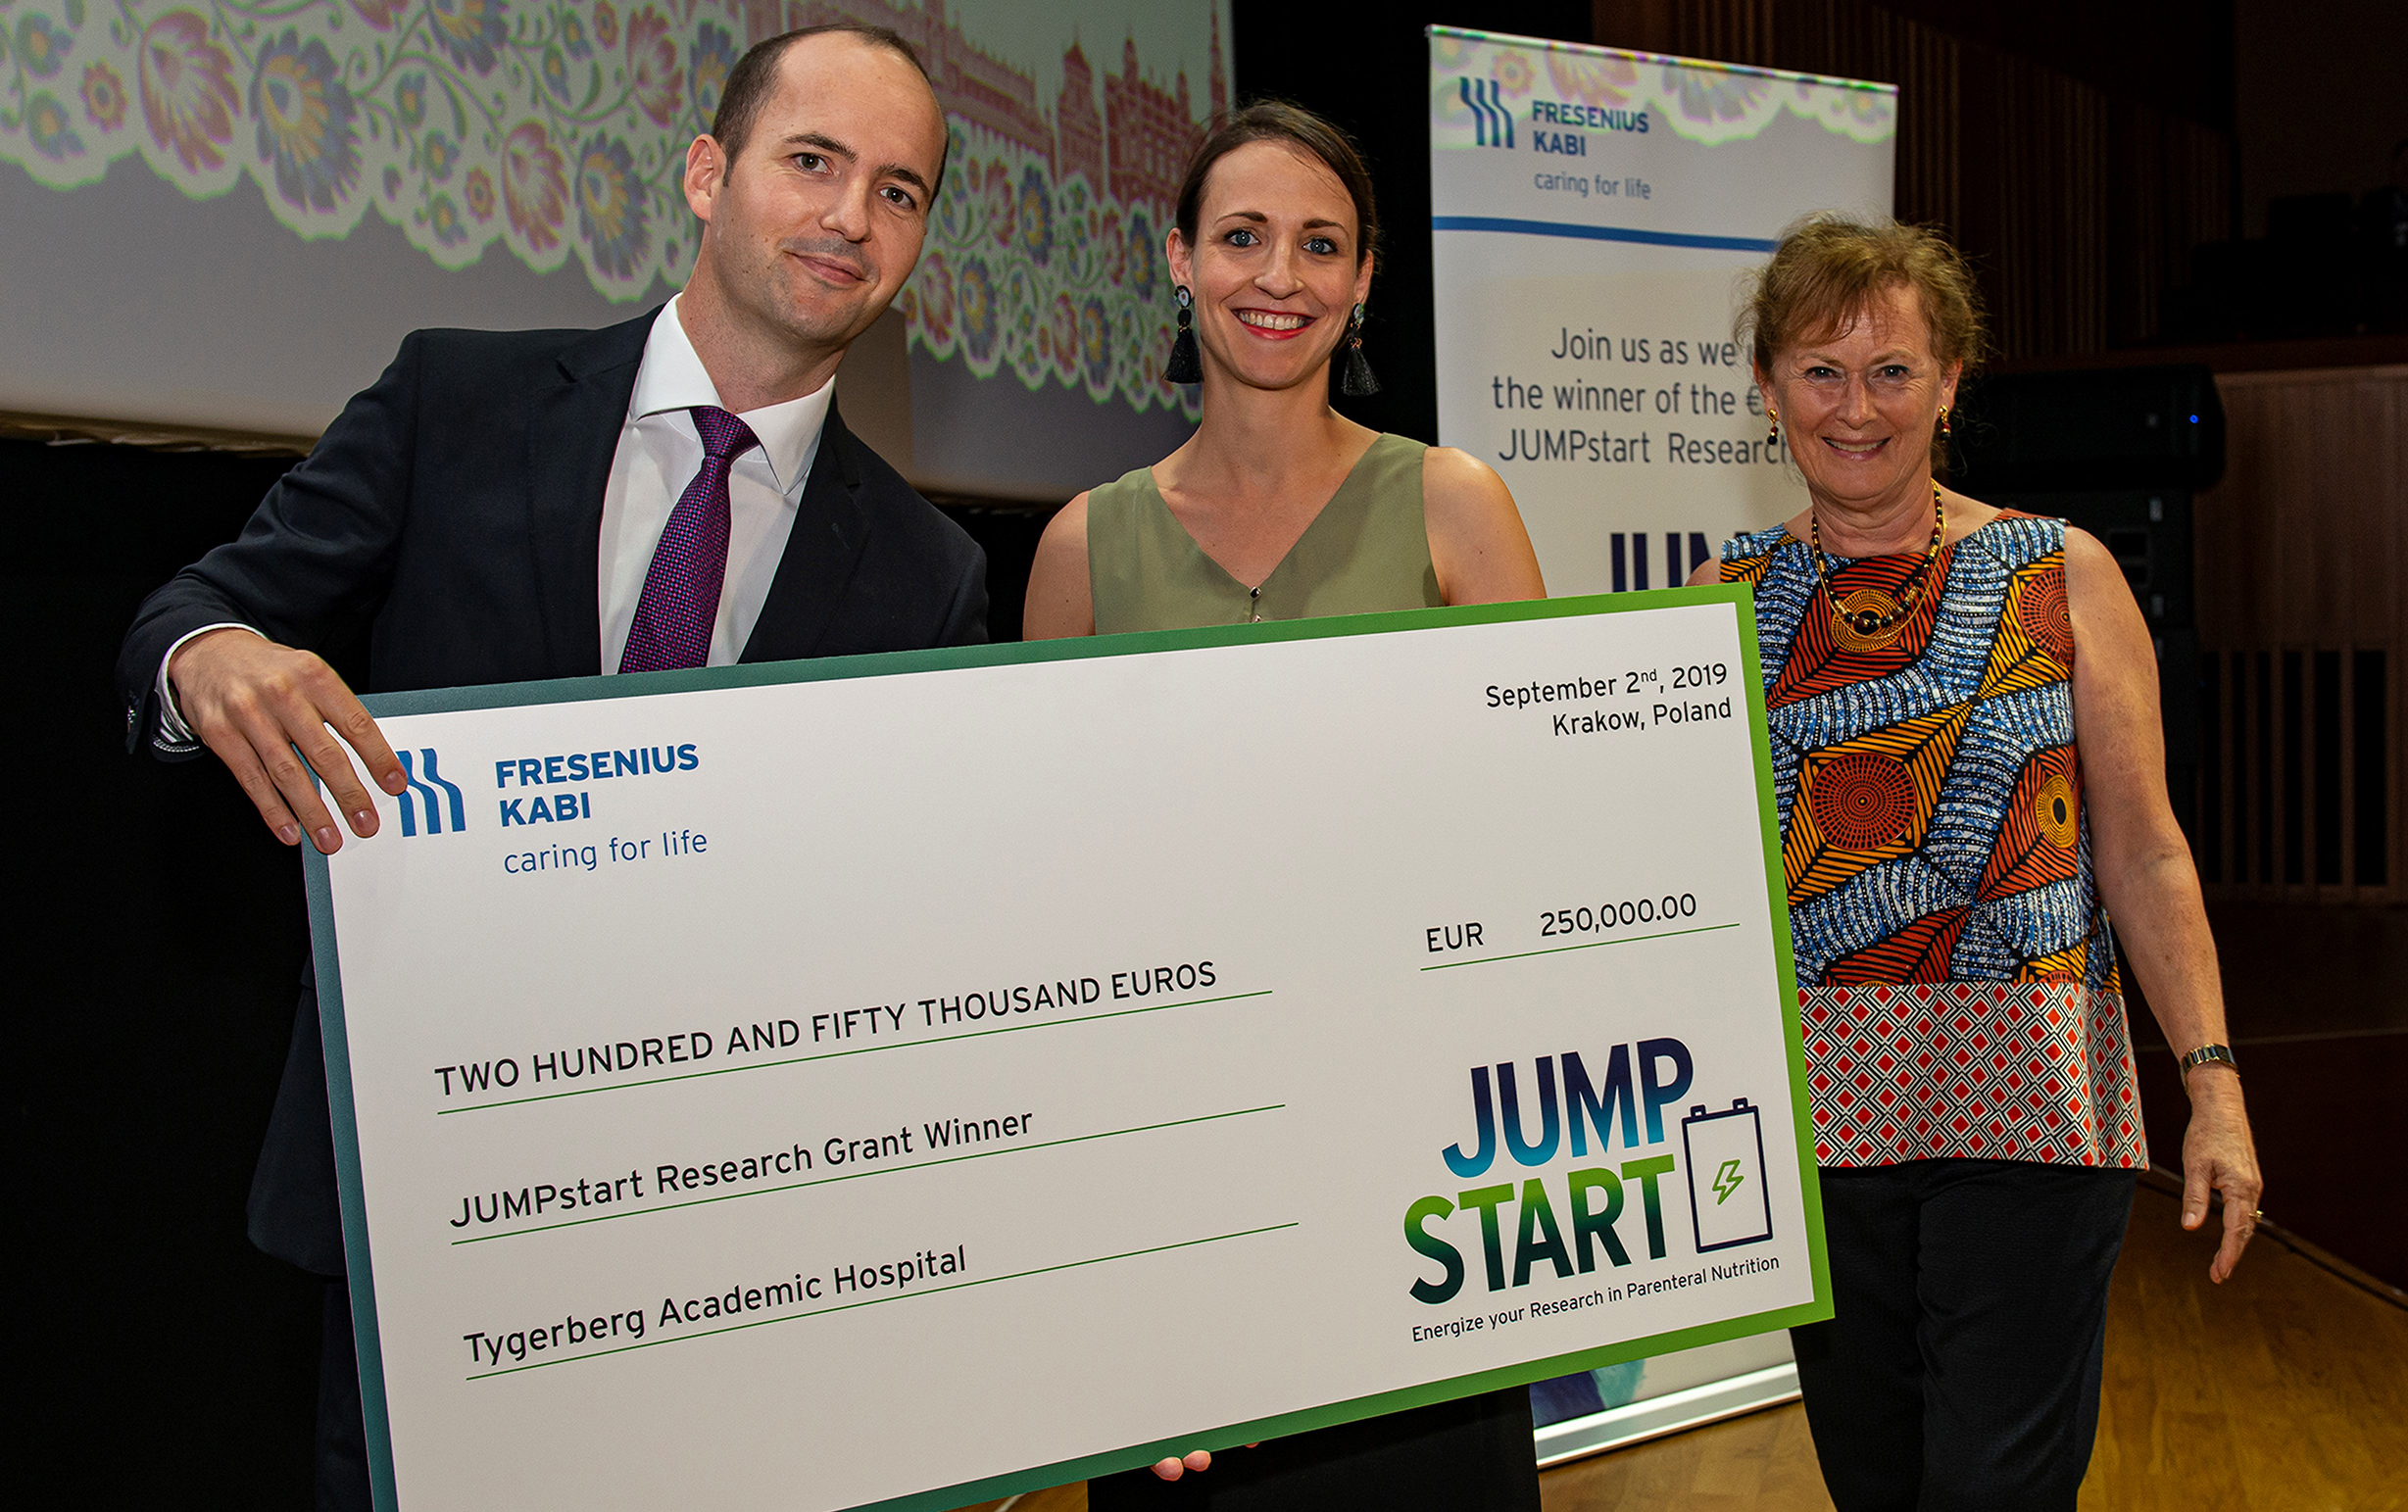 The global healthcare company confirms its commitment to support parenteral nutrition research by awarding €250,000 through the JUMPstart Research Grant.